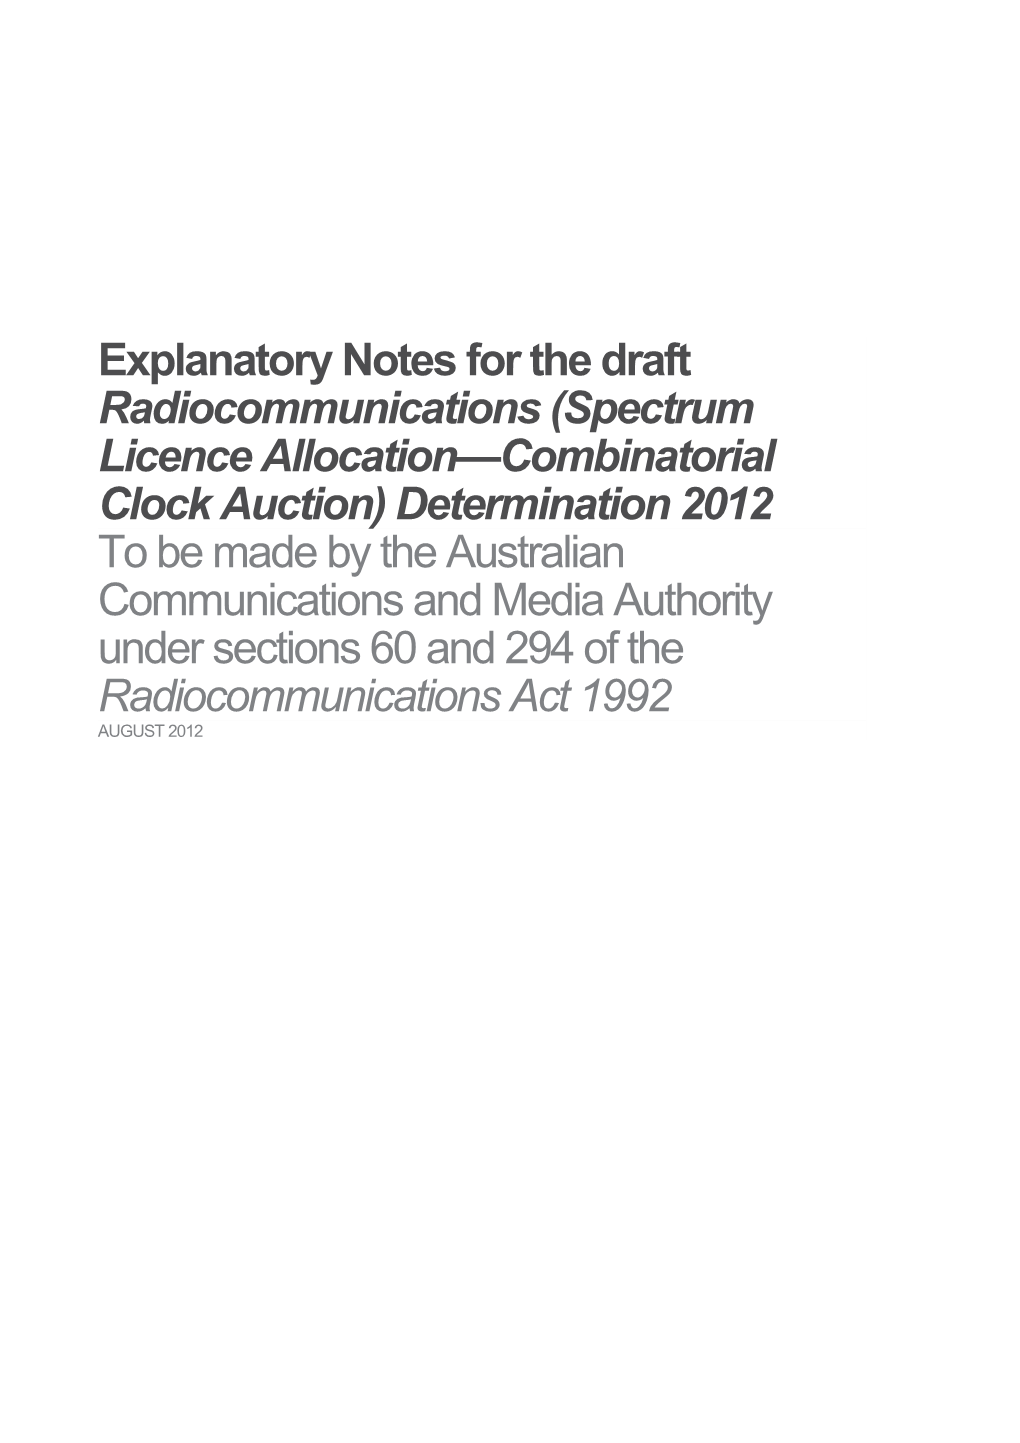 Explanatory Notes for the Draft Radiocommunications (Spectrum Licence Allocation Combinatorial